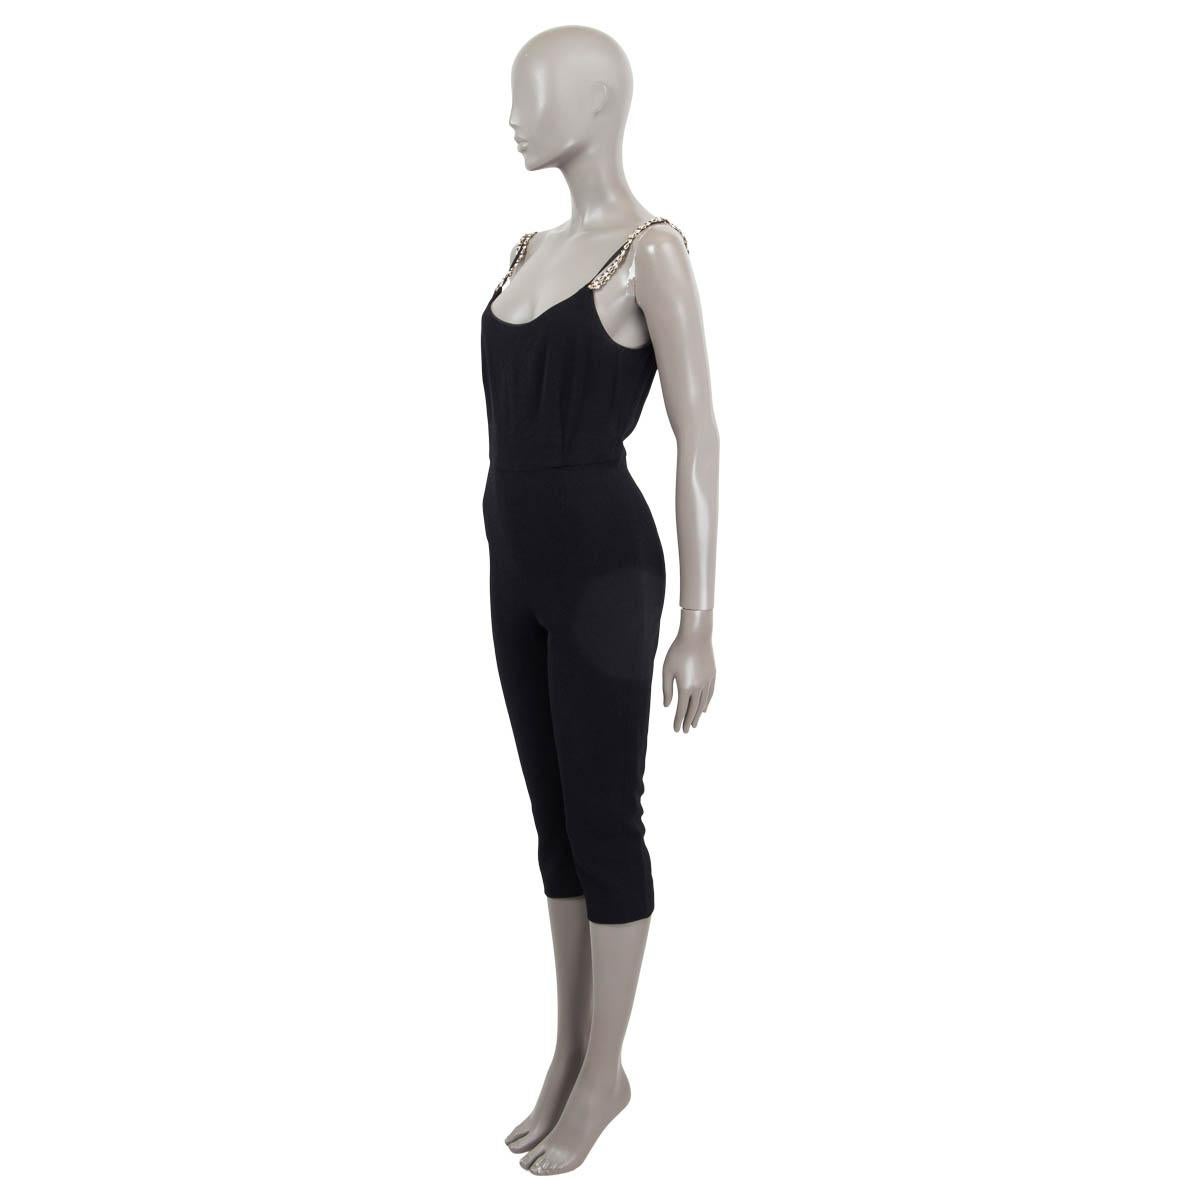 100% authentic Chanel 2019 knee length jumpsuit in black viscose and elastane (assumed cause tag is missing). Features pearl and chain embellished straps. Opens with a zipper and a hook on the back. Lined in black silk (assumed cause tag is